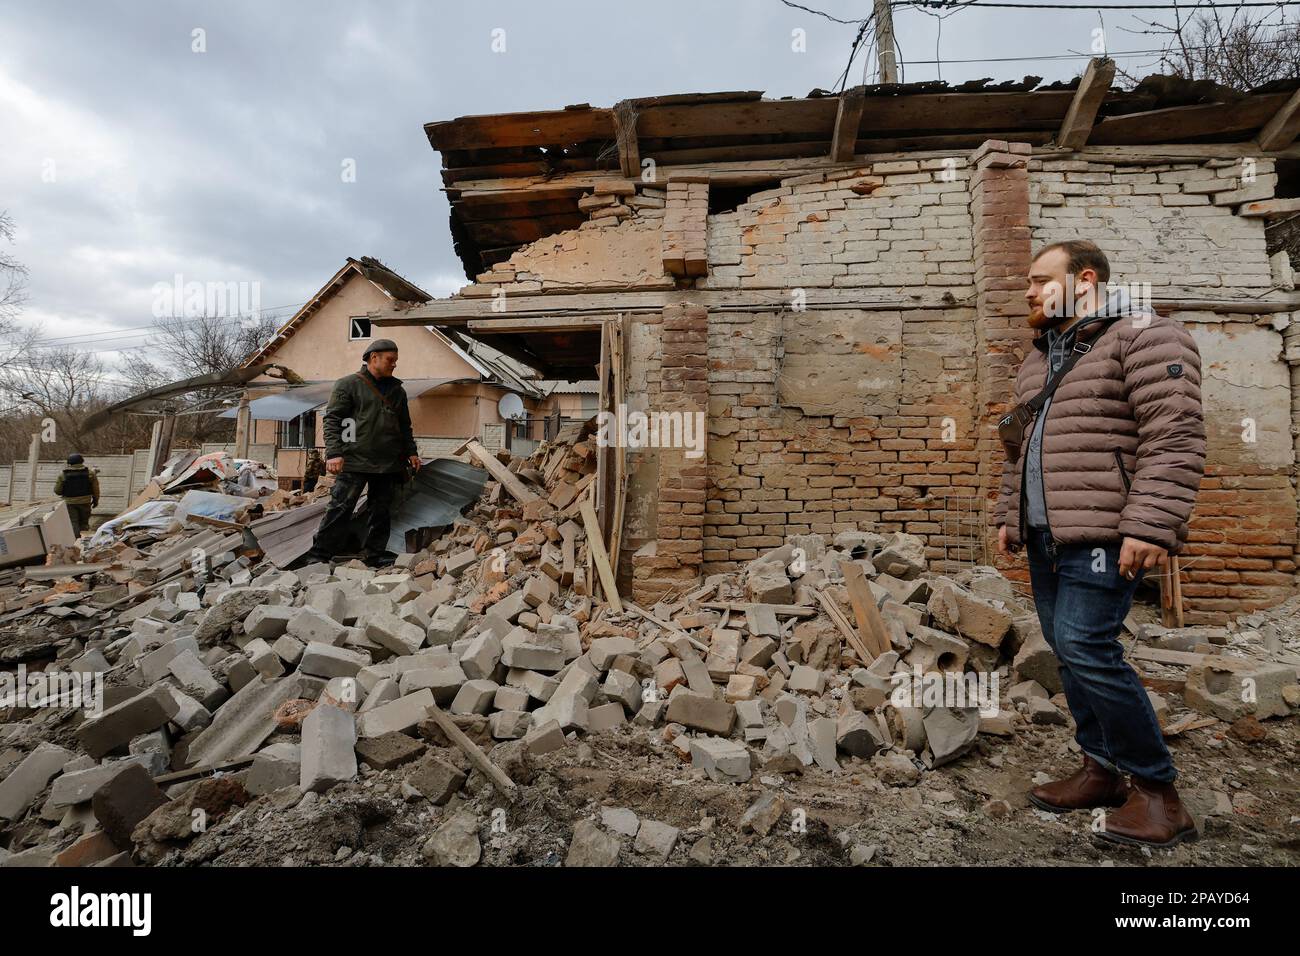 Men stand near buildings damaged in recent shelling in the course of Russia-Ukraine conflict in Donetsk, Russian-controlled Ukraine, March 12, 2023. REUTERS/Alexander Ermochenko Stock Photo